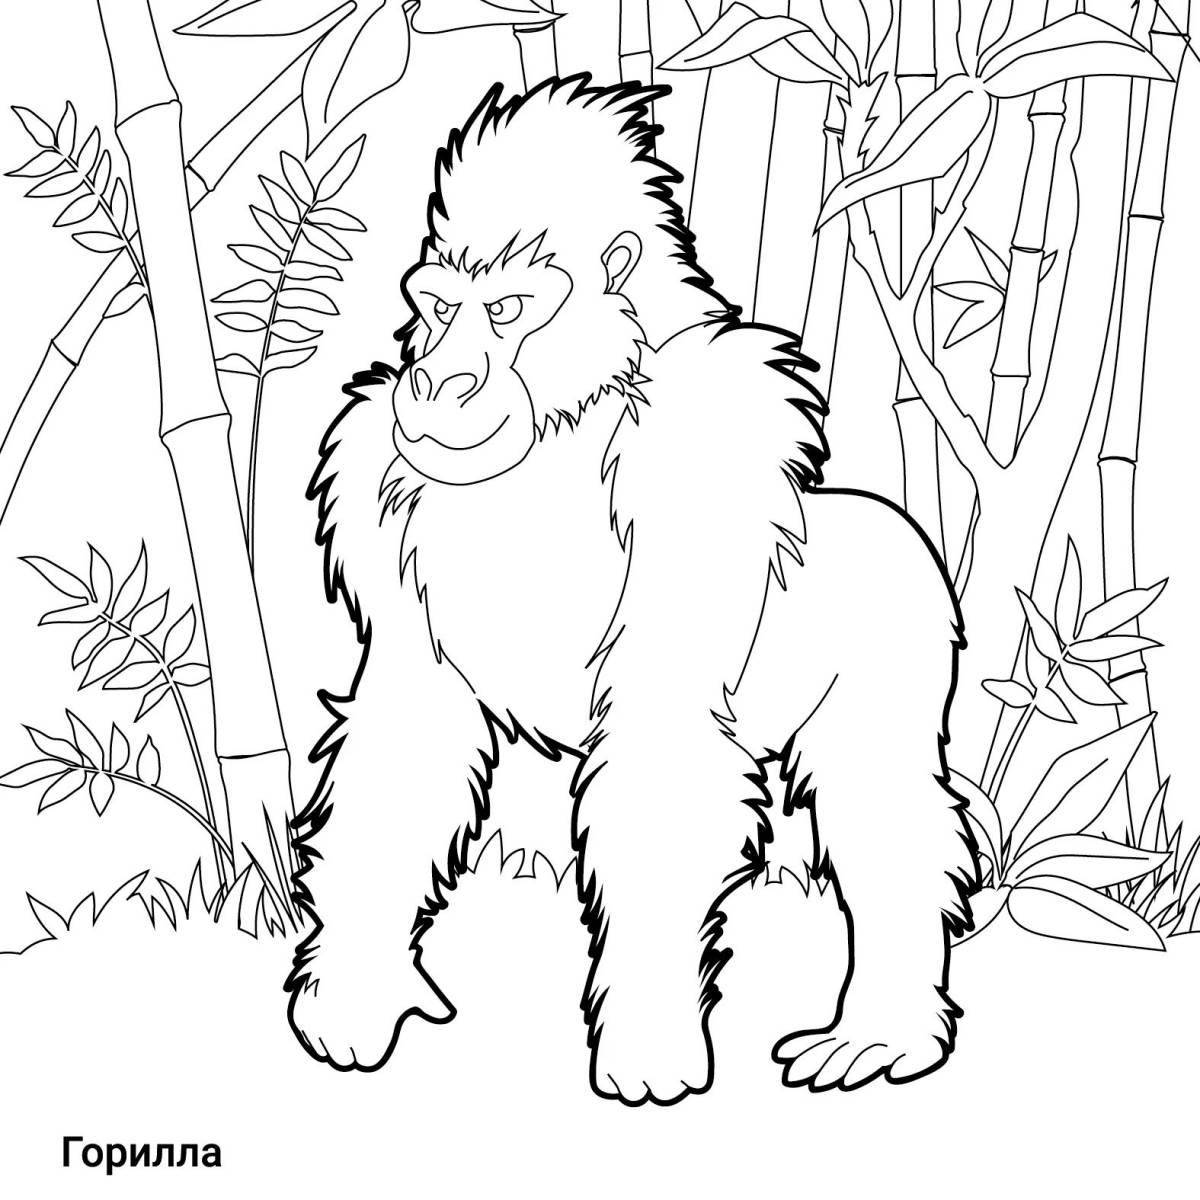 Great gorilla coloring book for kids